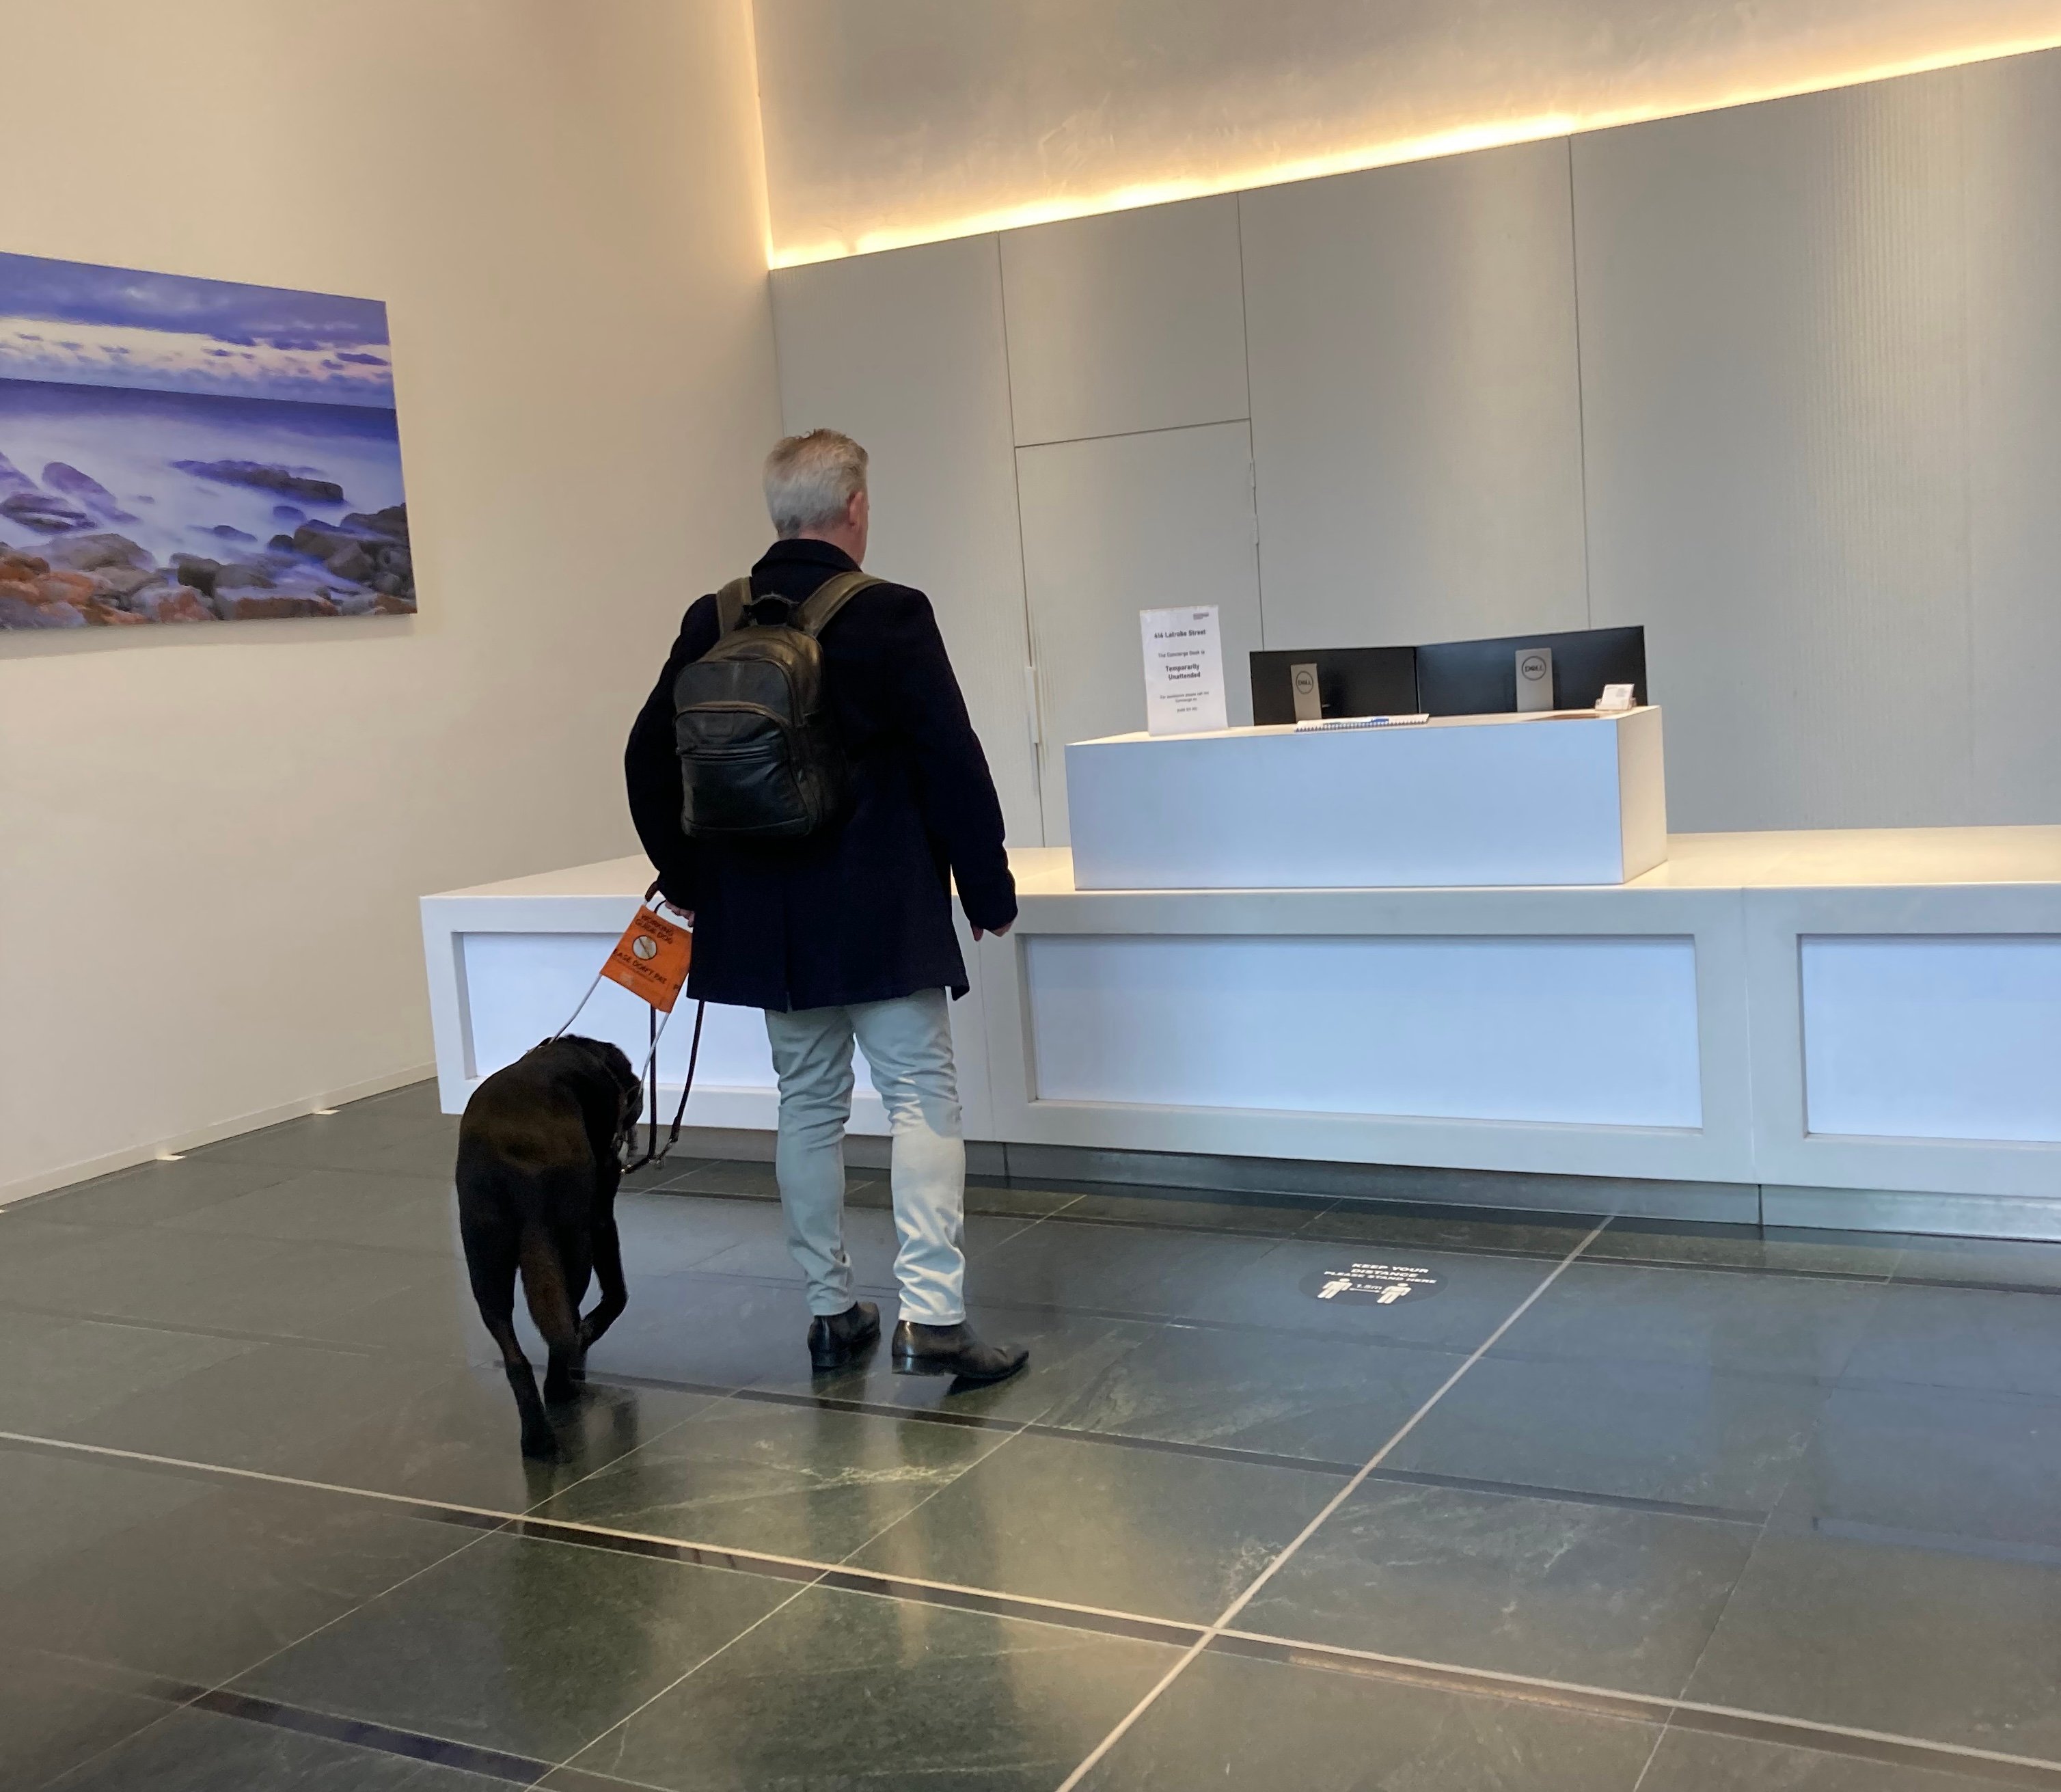 Blind person and guide doc arrive at empty reception desk